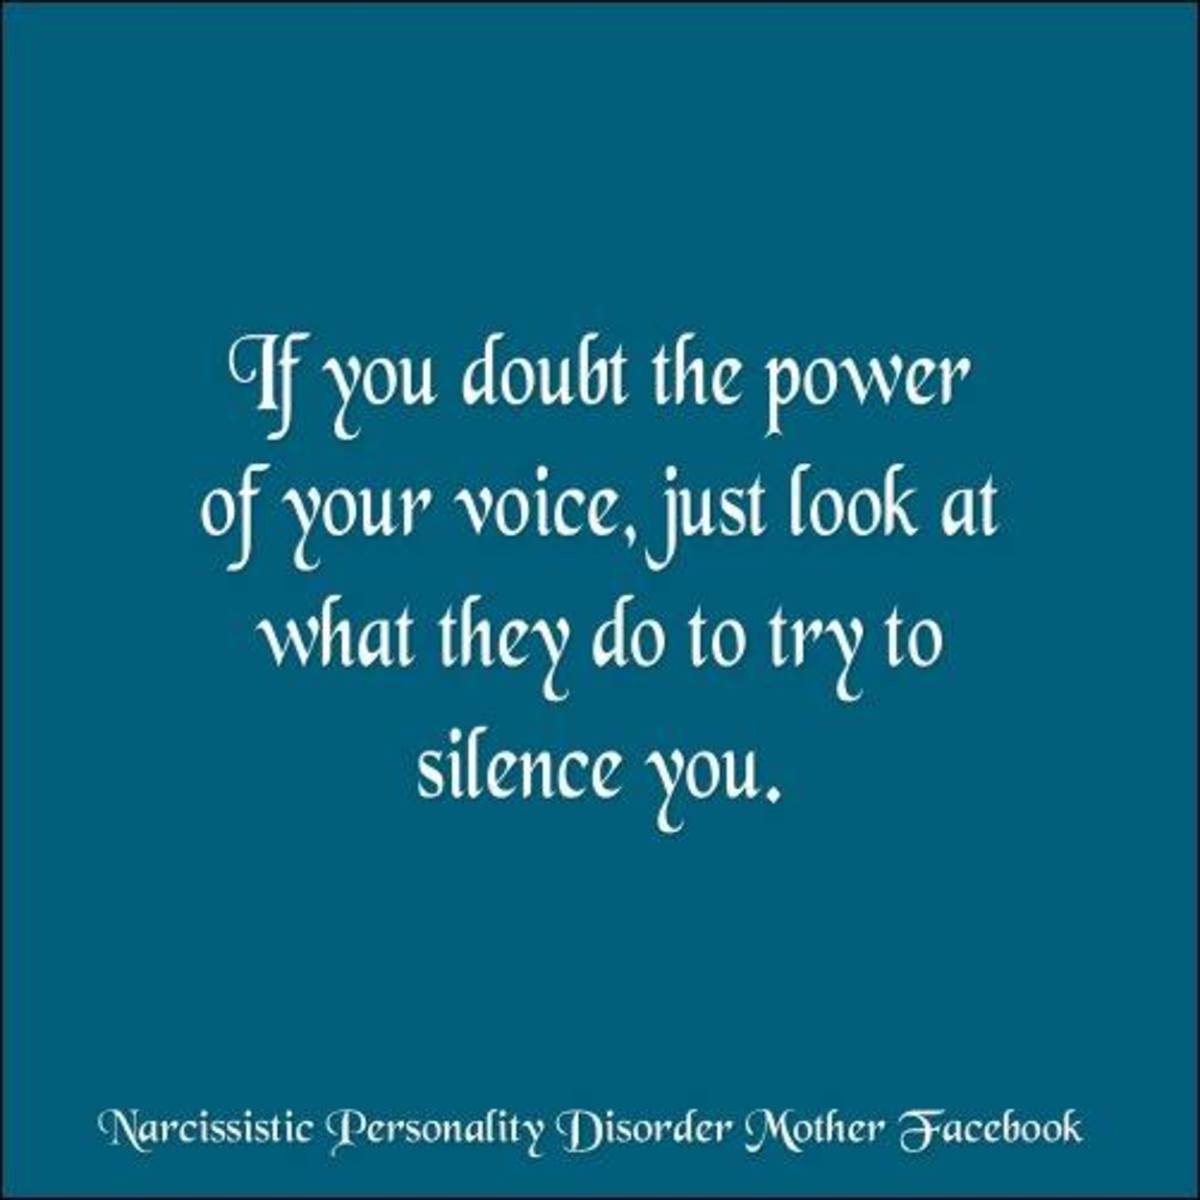 If you doubt the power of your voice, just look at what they do to try to silence you. - KC3